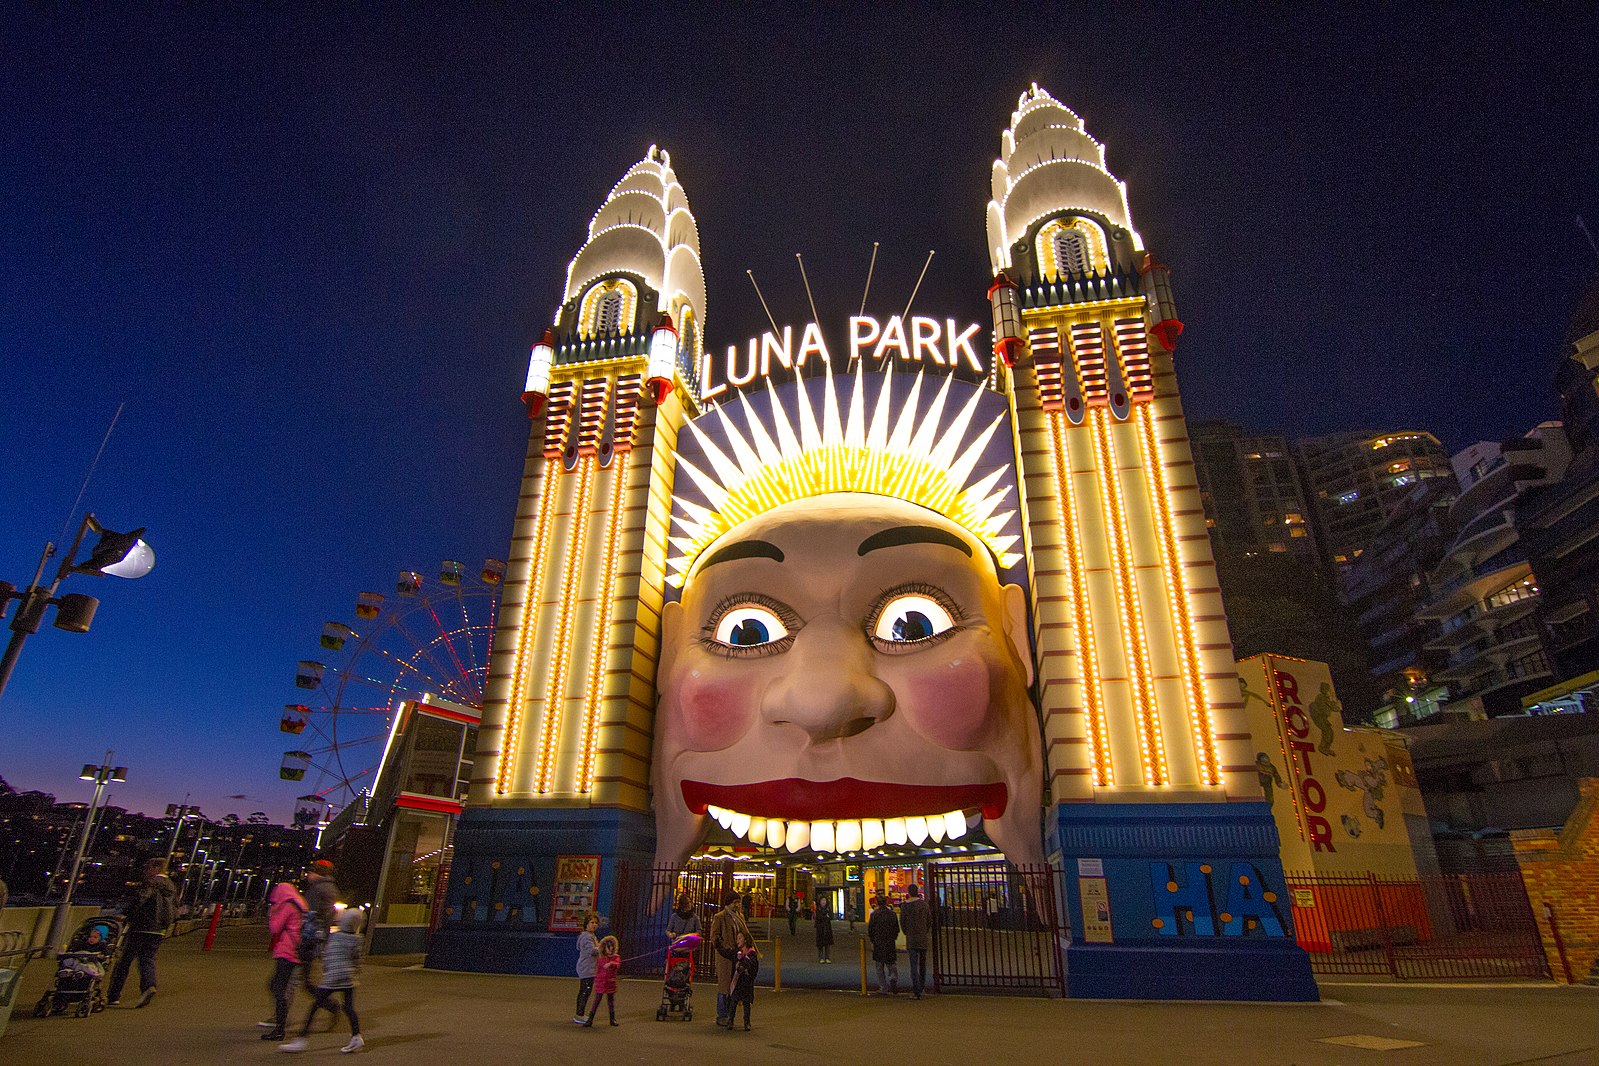 Luna Park up for sale for the first time in two decades